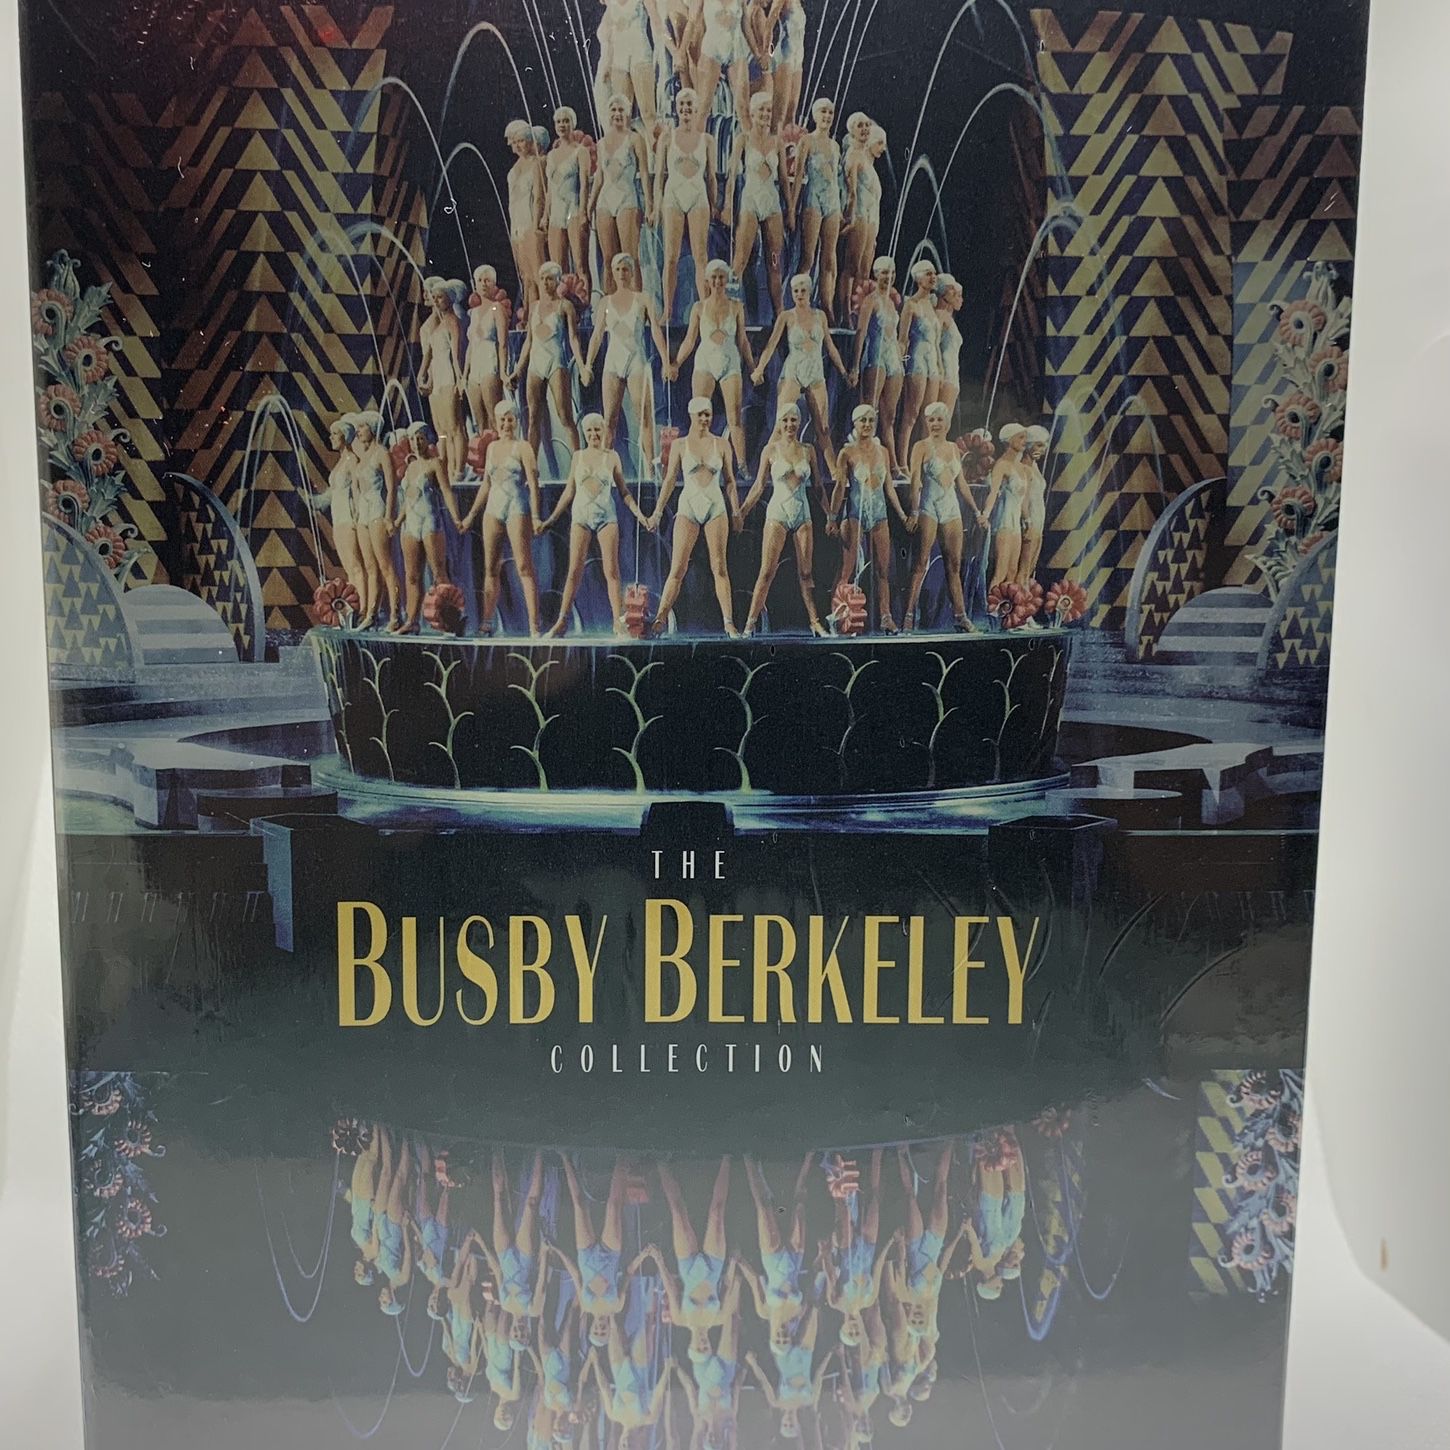 The Busby Berkeley Collection (DVD, 2006, 6-Disc Set). Condition is "Brand New".